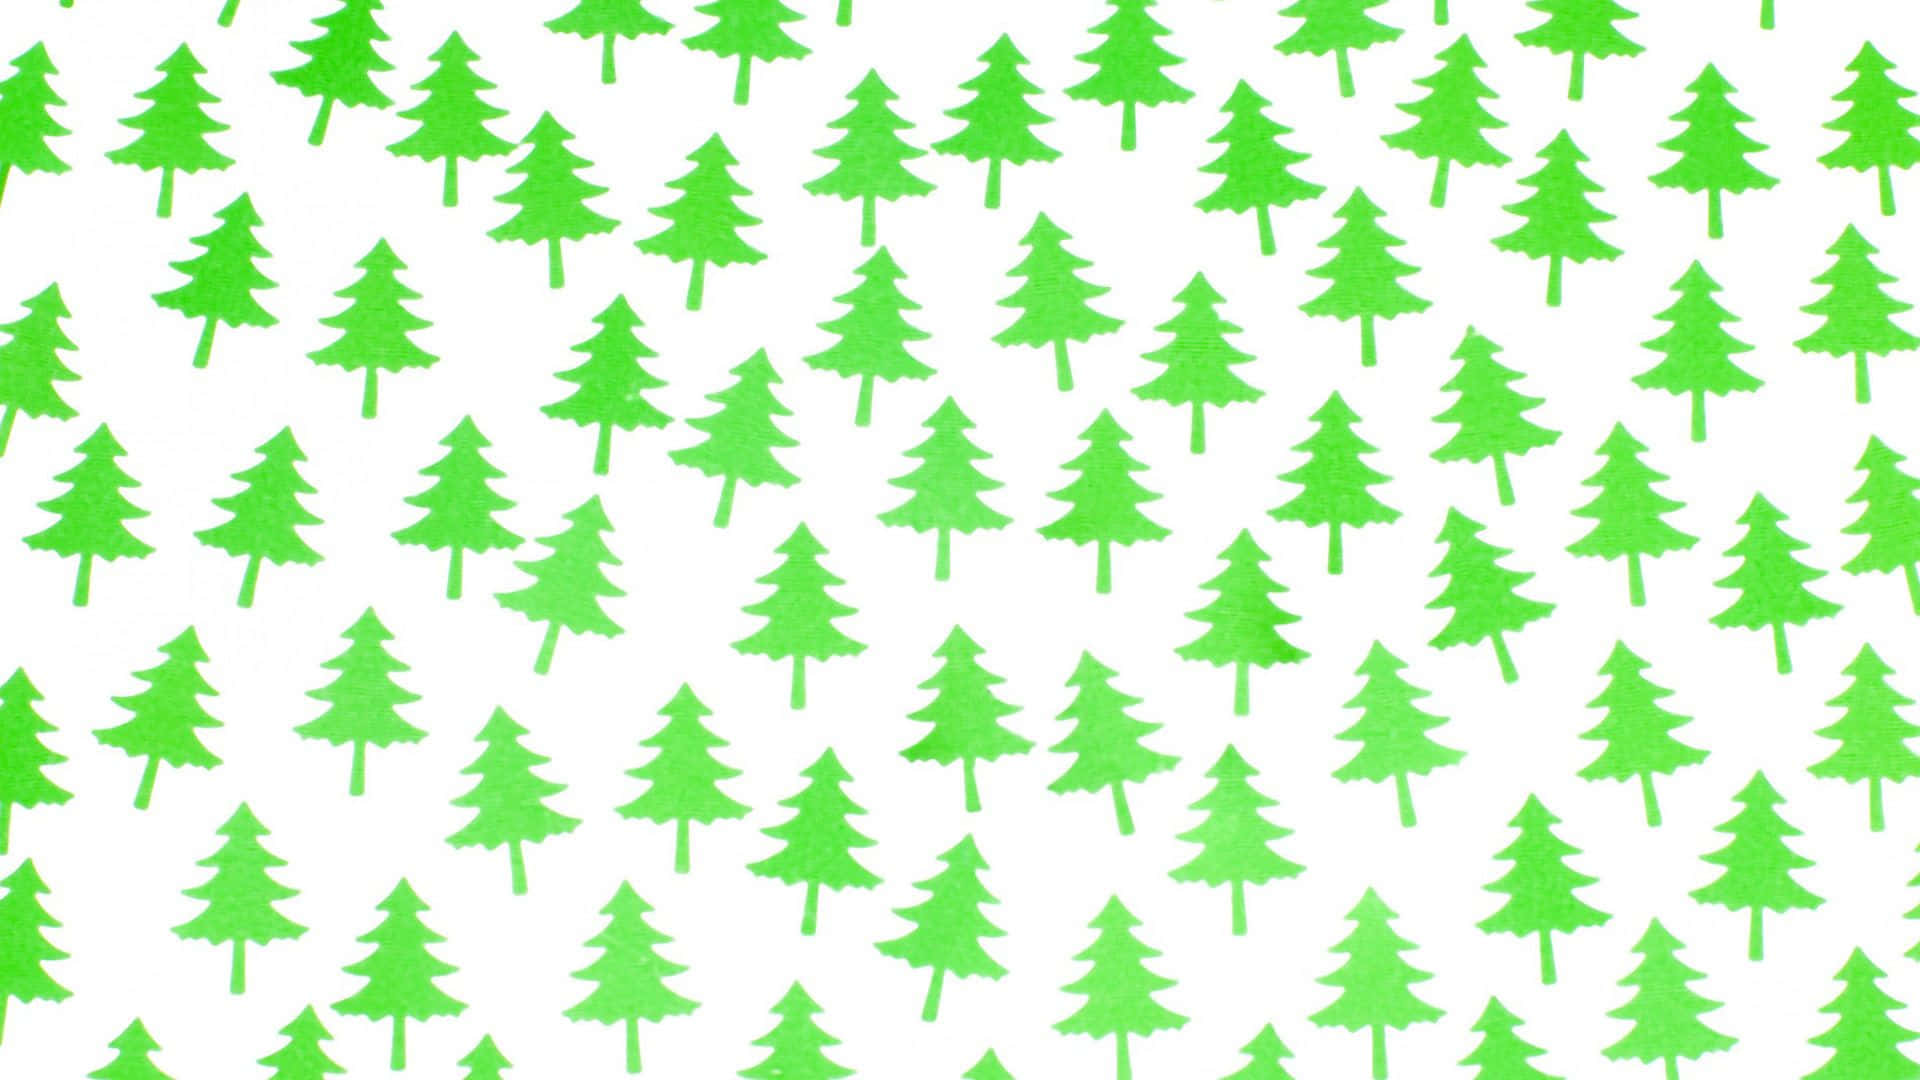 Celebrate the joy of Christmas with this festive pattern Wallpaper